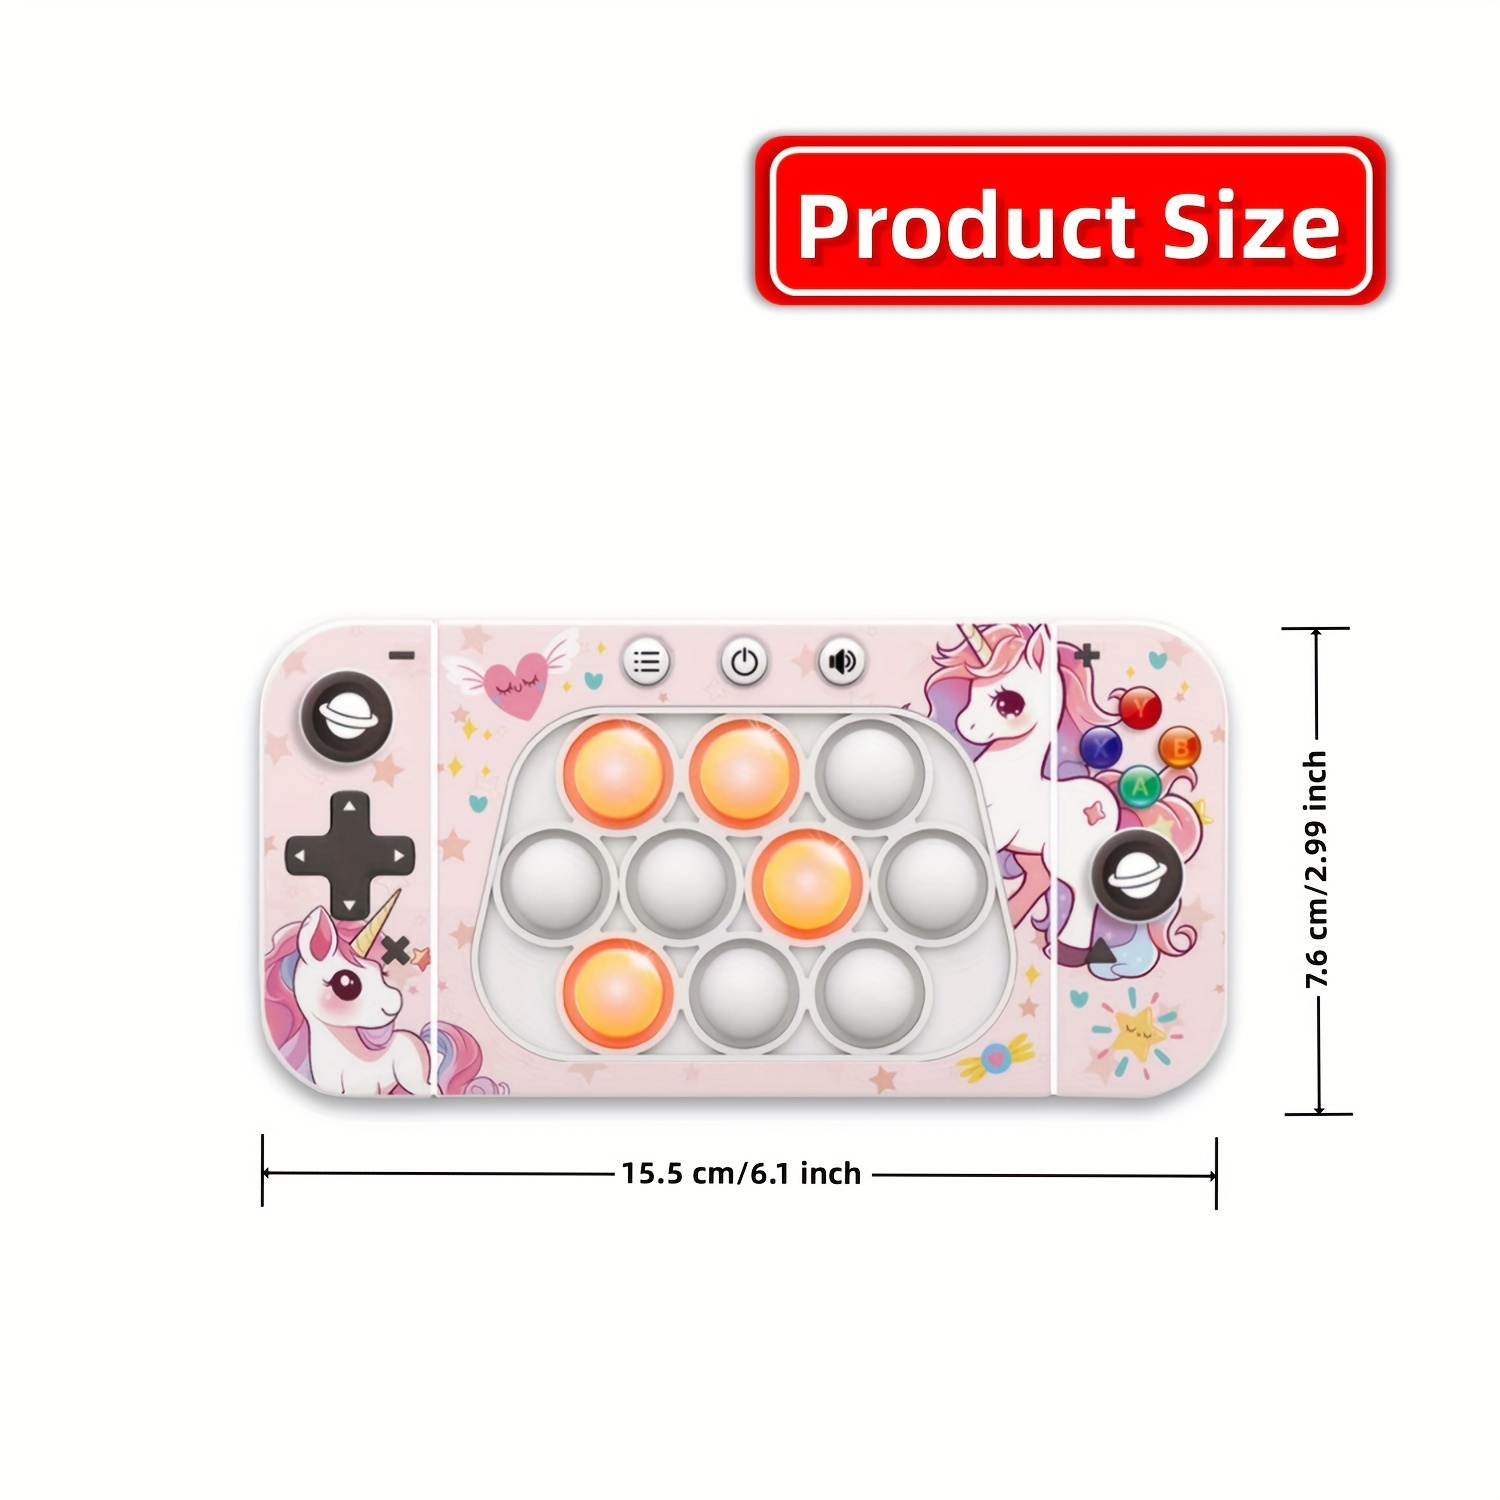 2pcs fast push handheld game pop light up game toys upgraded version 2 lightly push to turn off the lit bubbles fidget sensory toys